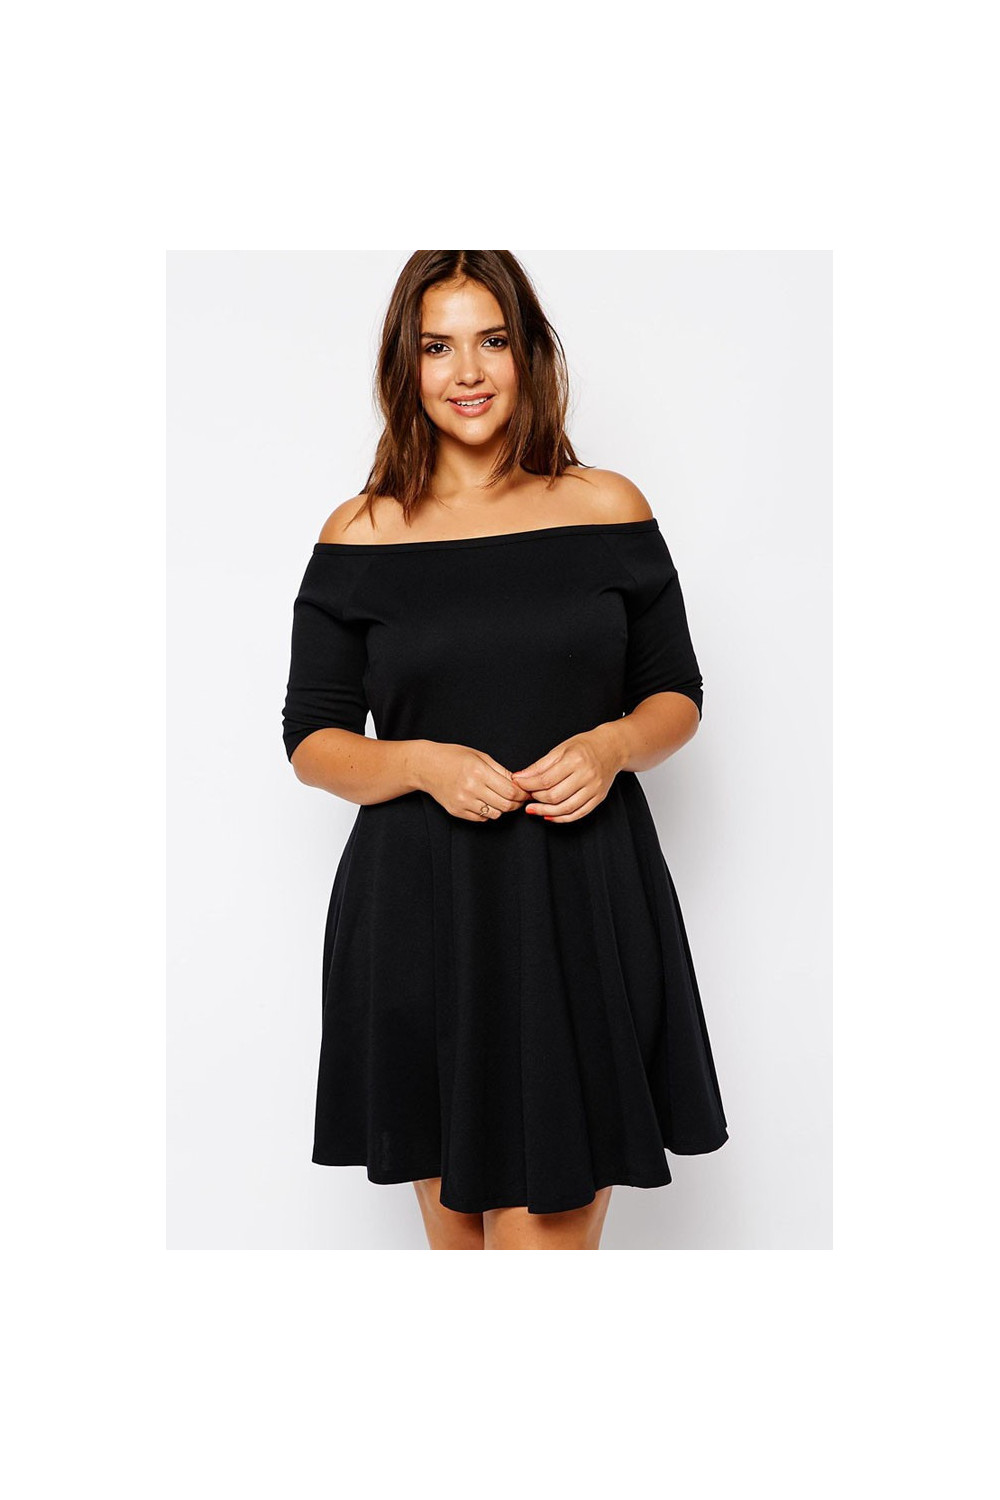 Pleated black dress with bare shoulders